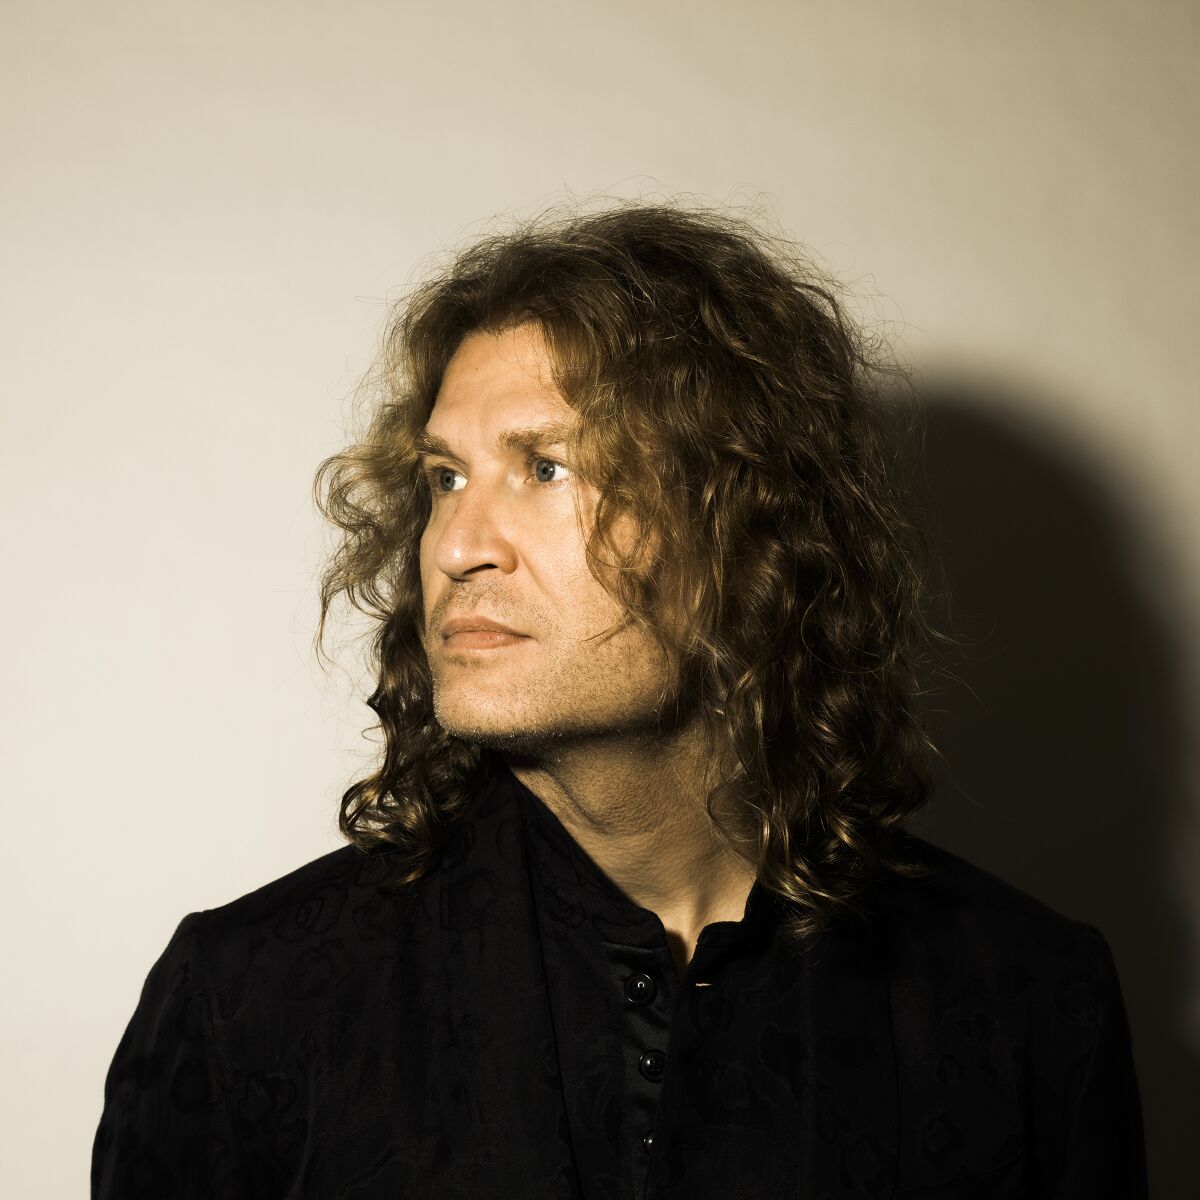 Dave Keuning, the co-founder of the rock band The Killers